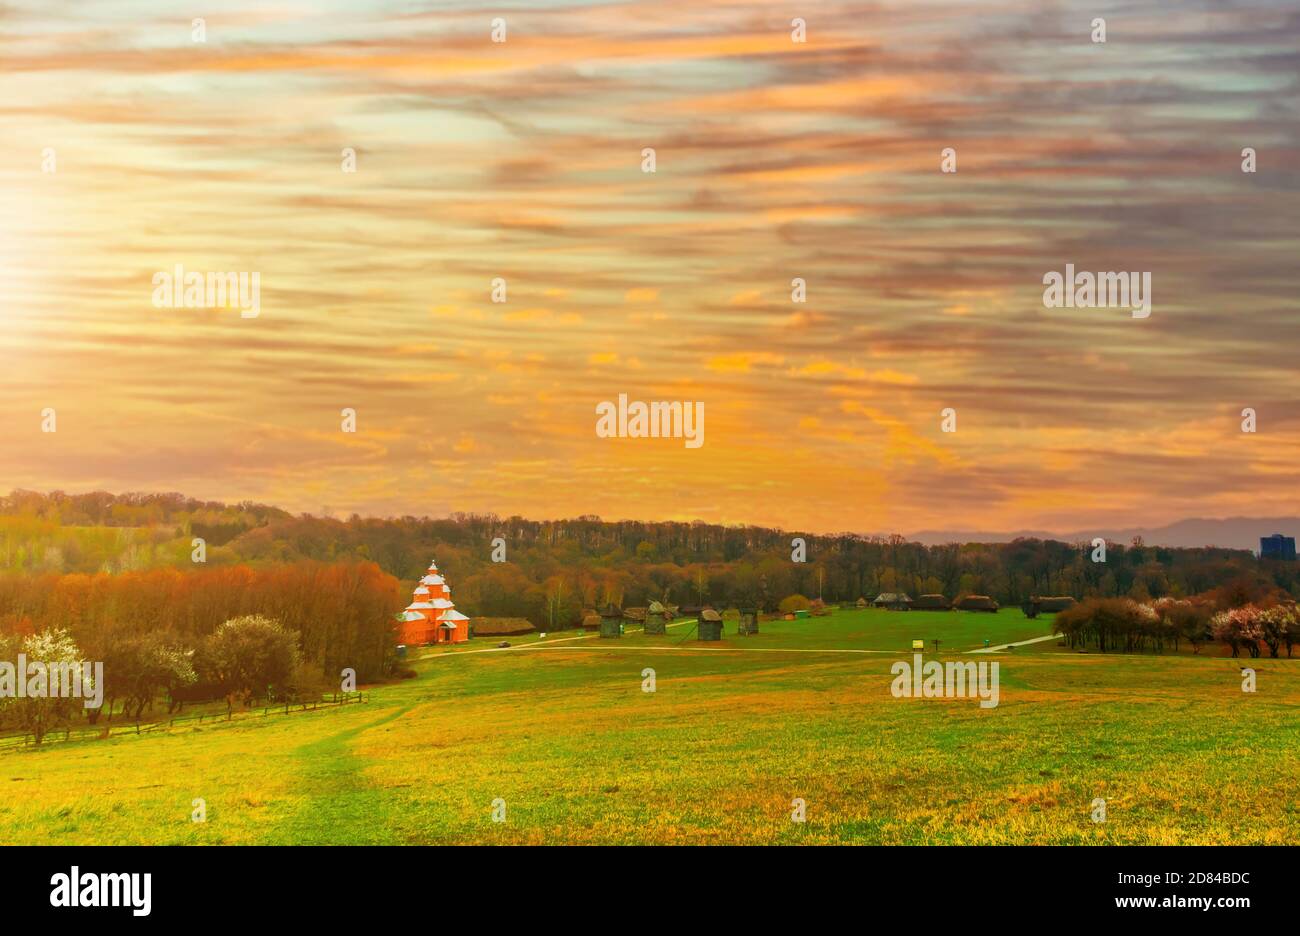 an orthodox church in a yellow field in a rural countryside area of Ukraine at sunset Stock Photo